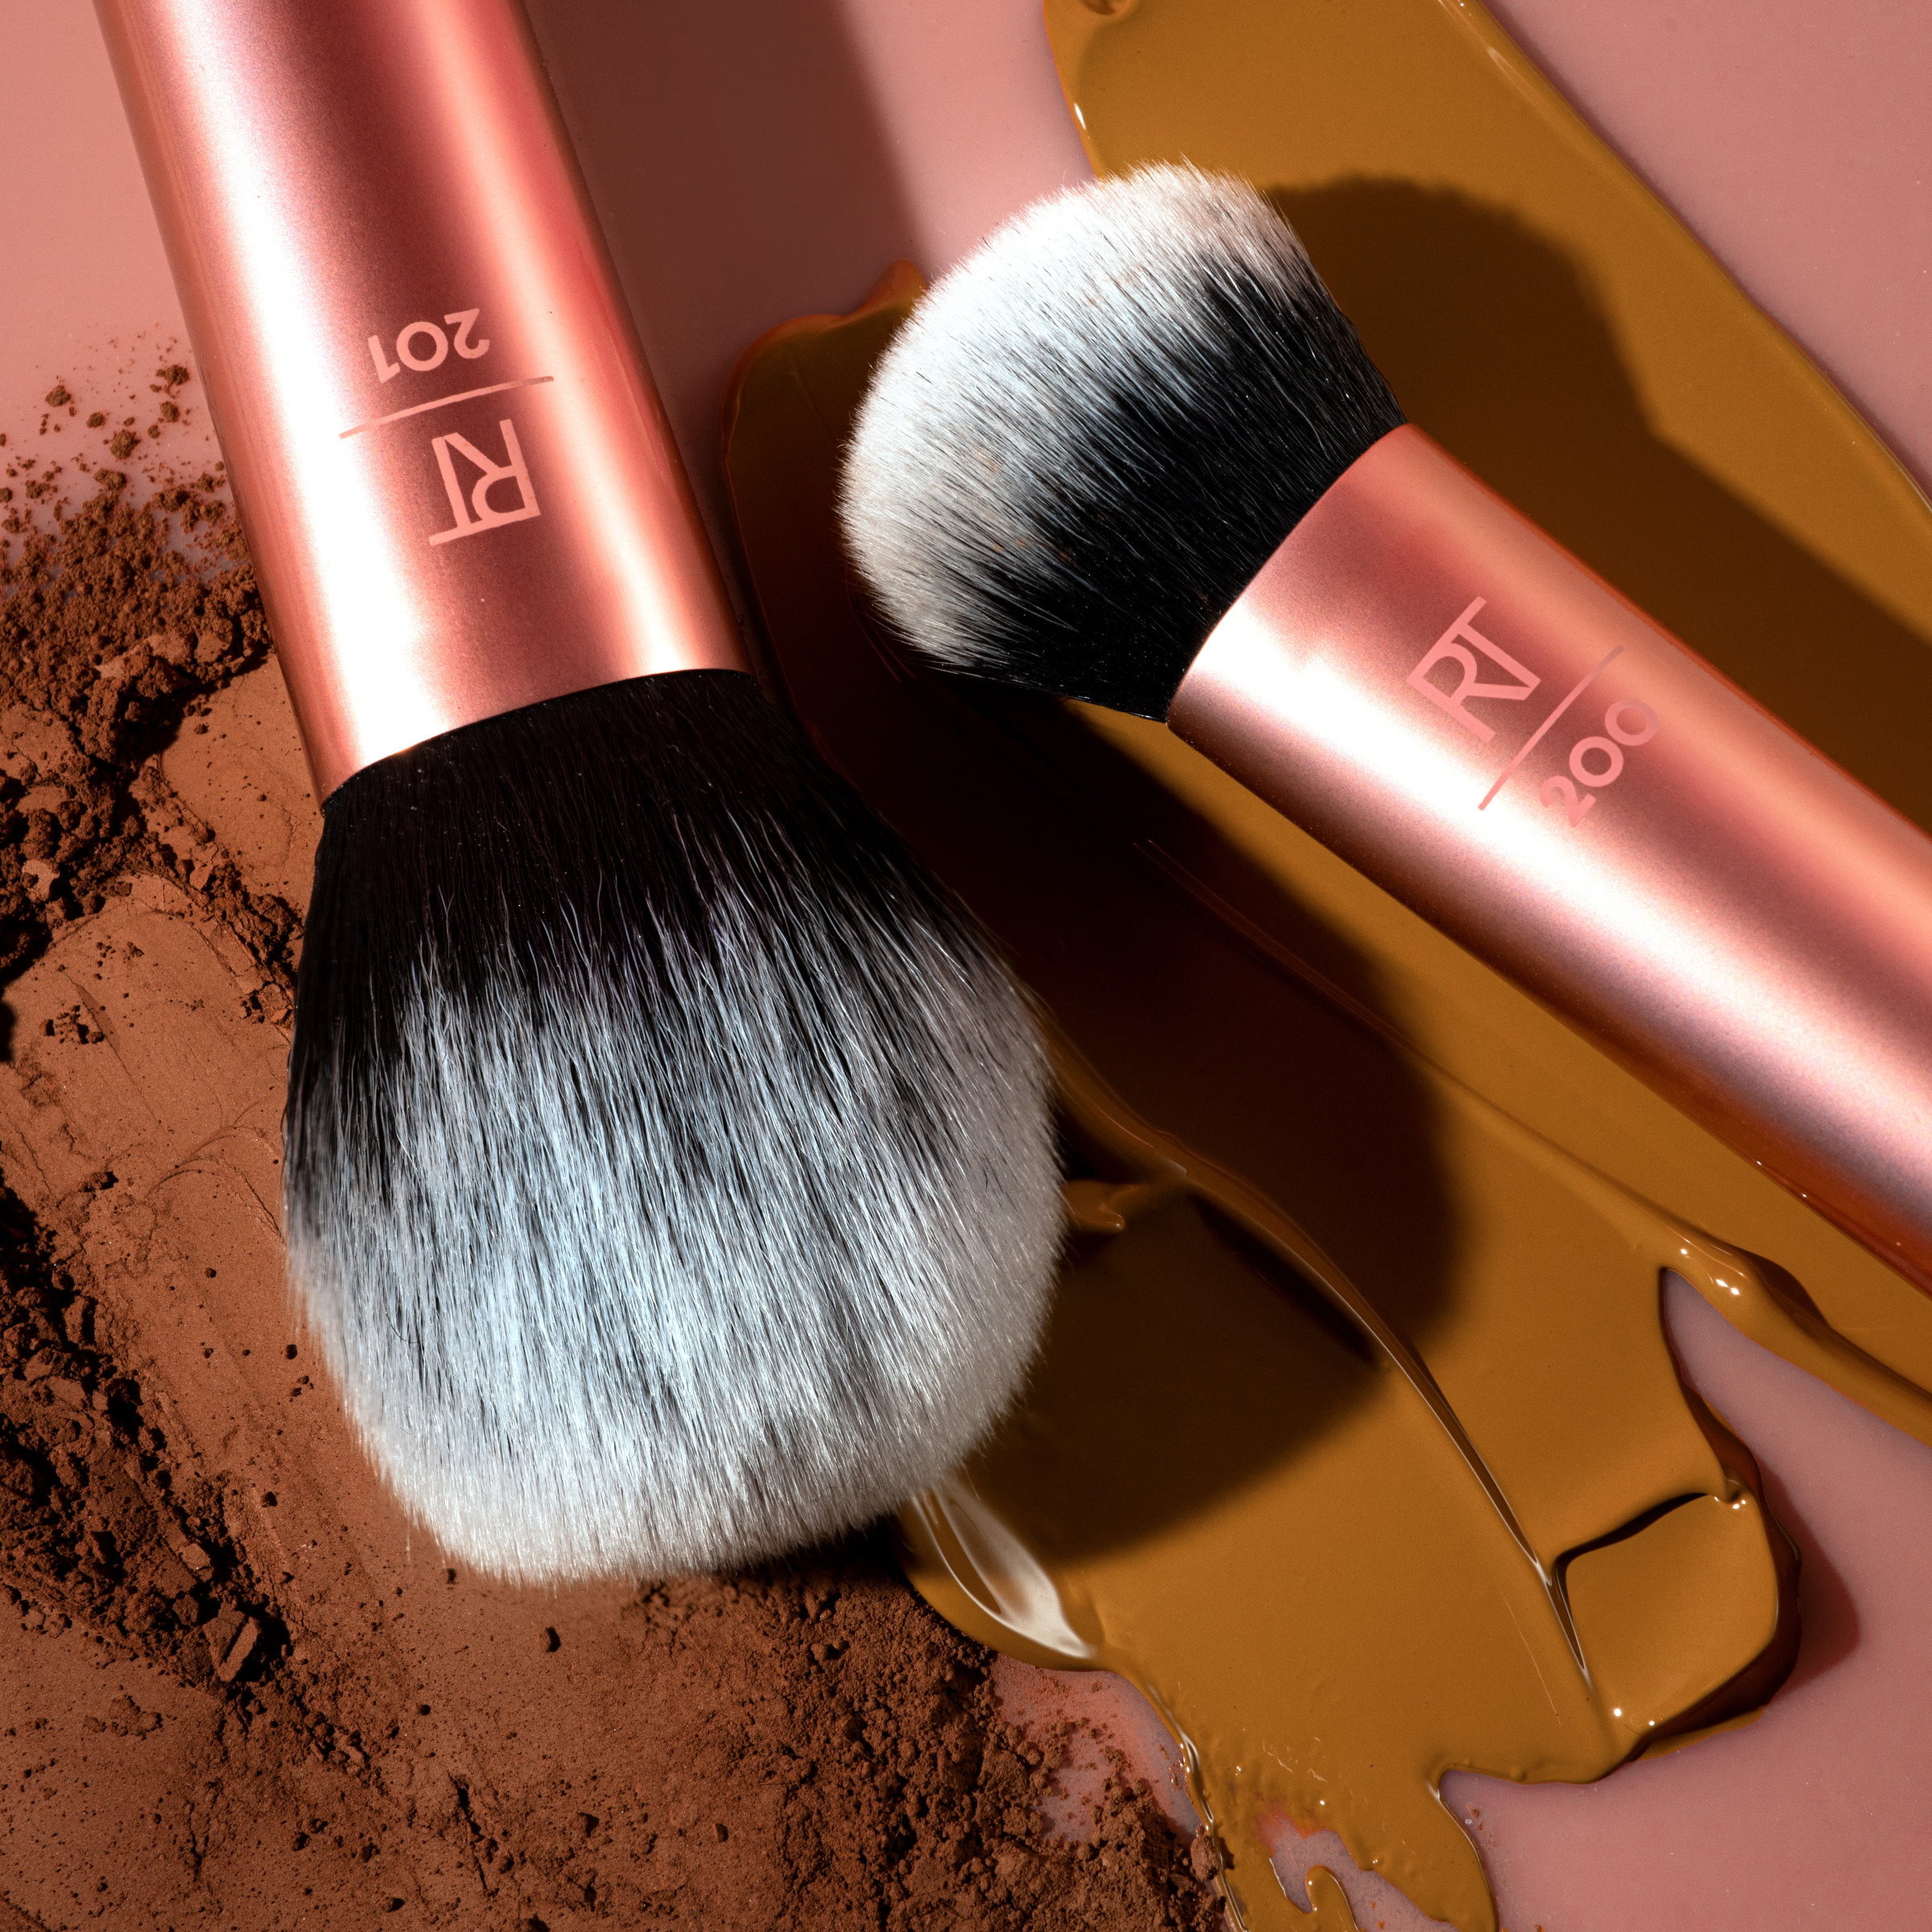 Real Techniques Expert Face Makeup Brush, Foundation Blending Brush, 1 Count - image 7 of 11